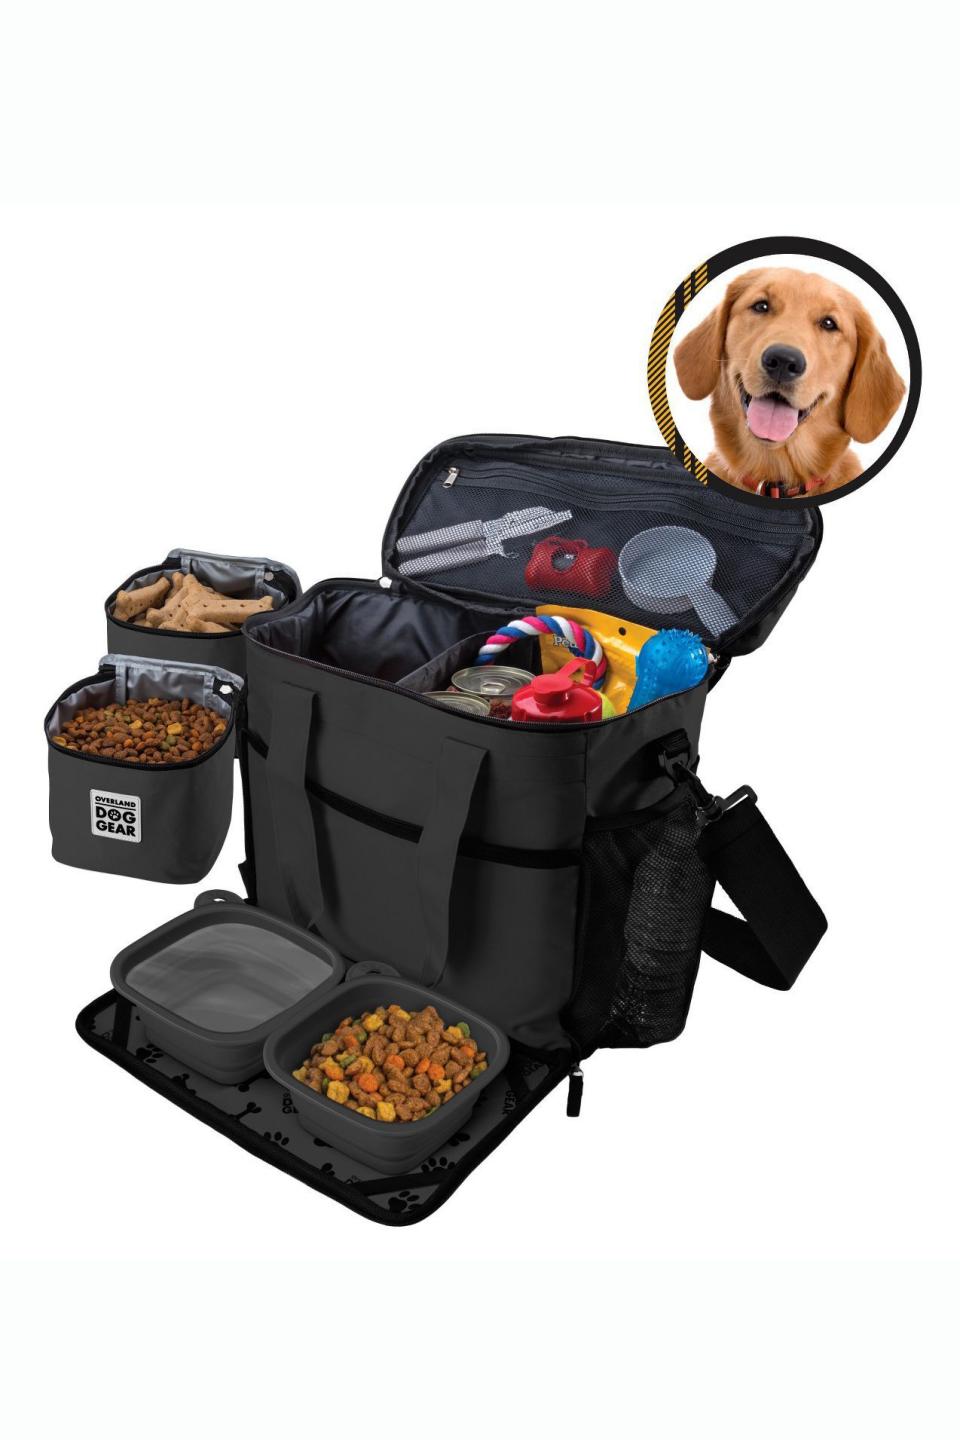 Organize Your Supplies in a Dog Gear Travel Bag